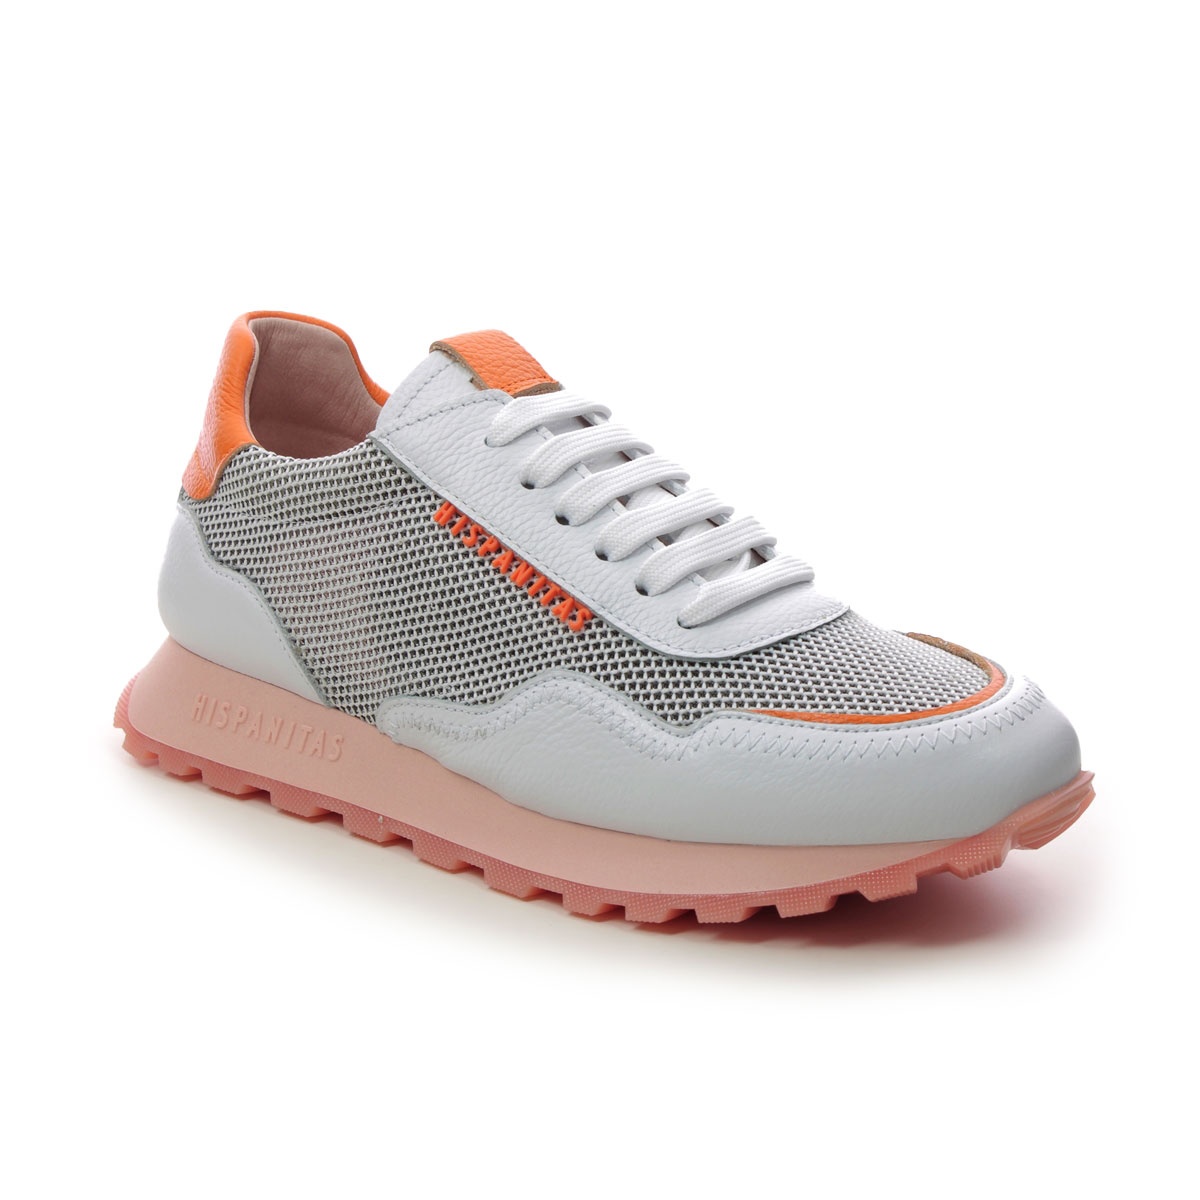 Hispanitas Loira Perf Orange multi Womens trainers HV243231-B01 in a Plain Leather and Textile in Size 37